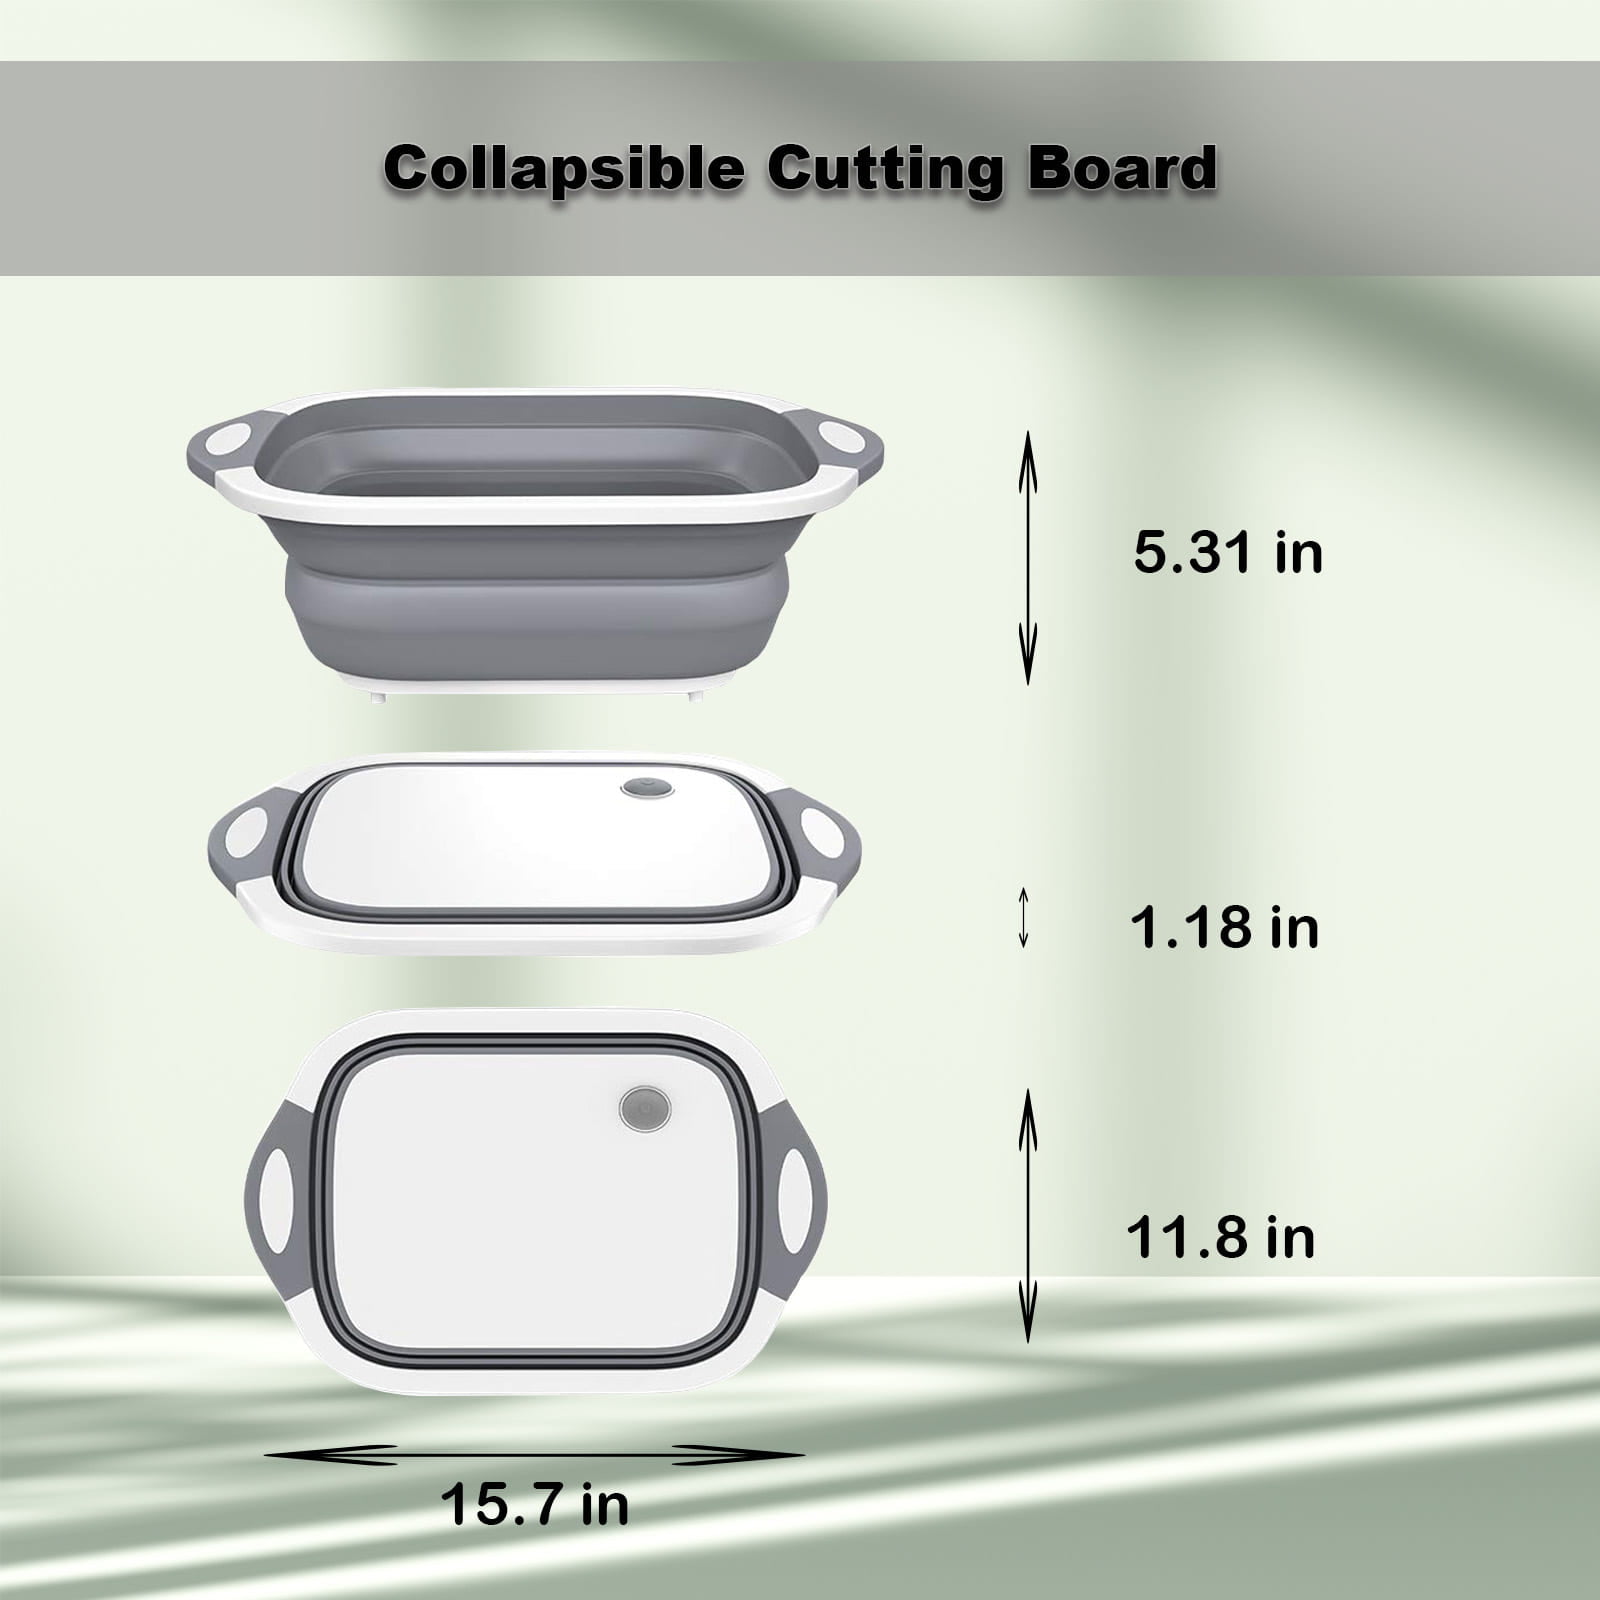 LIGHTSMAX 3-1 Multi Function Collapsible Cutting Board Drain Basket for Fruits Vegetable Meat Food Preparation - White